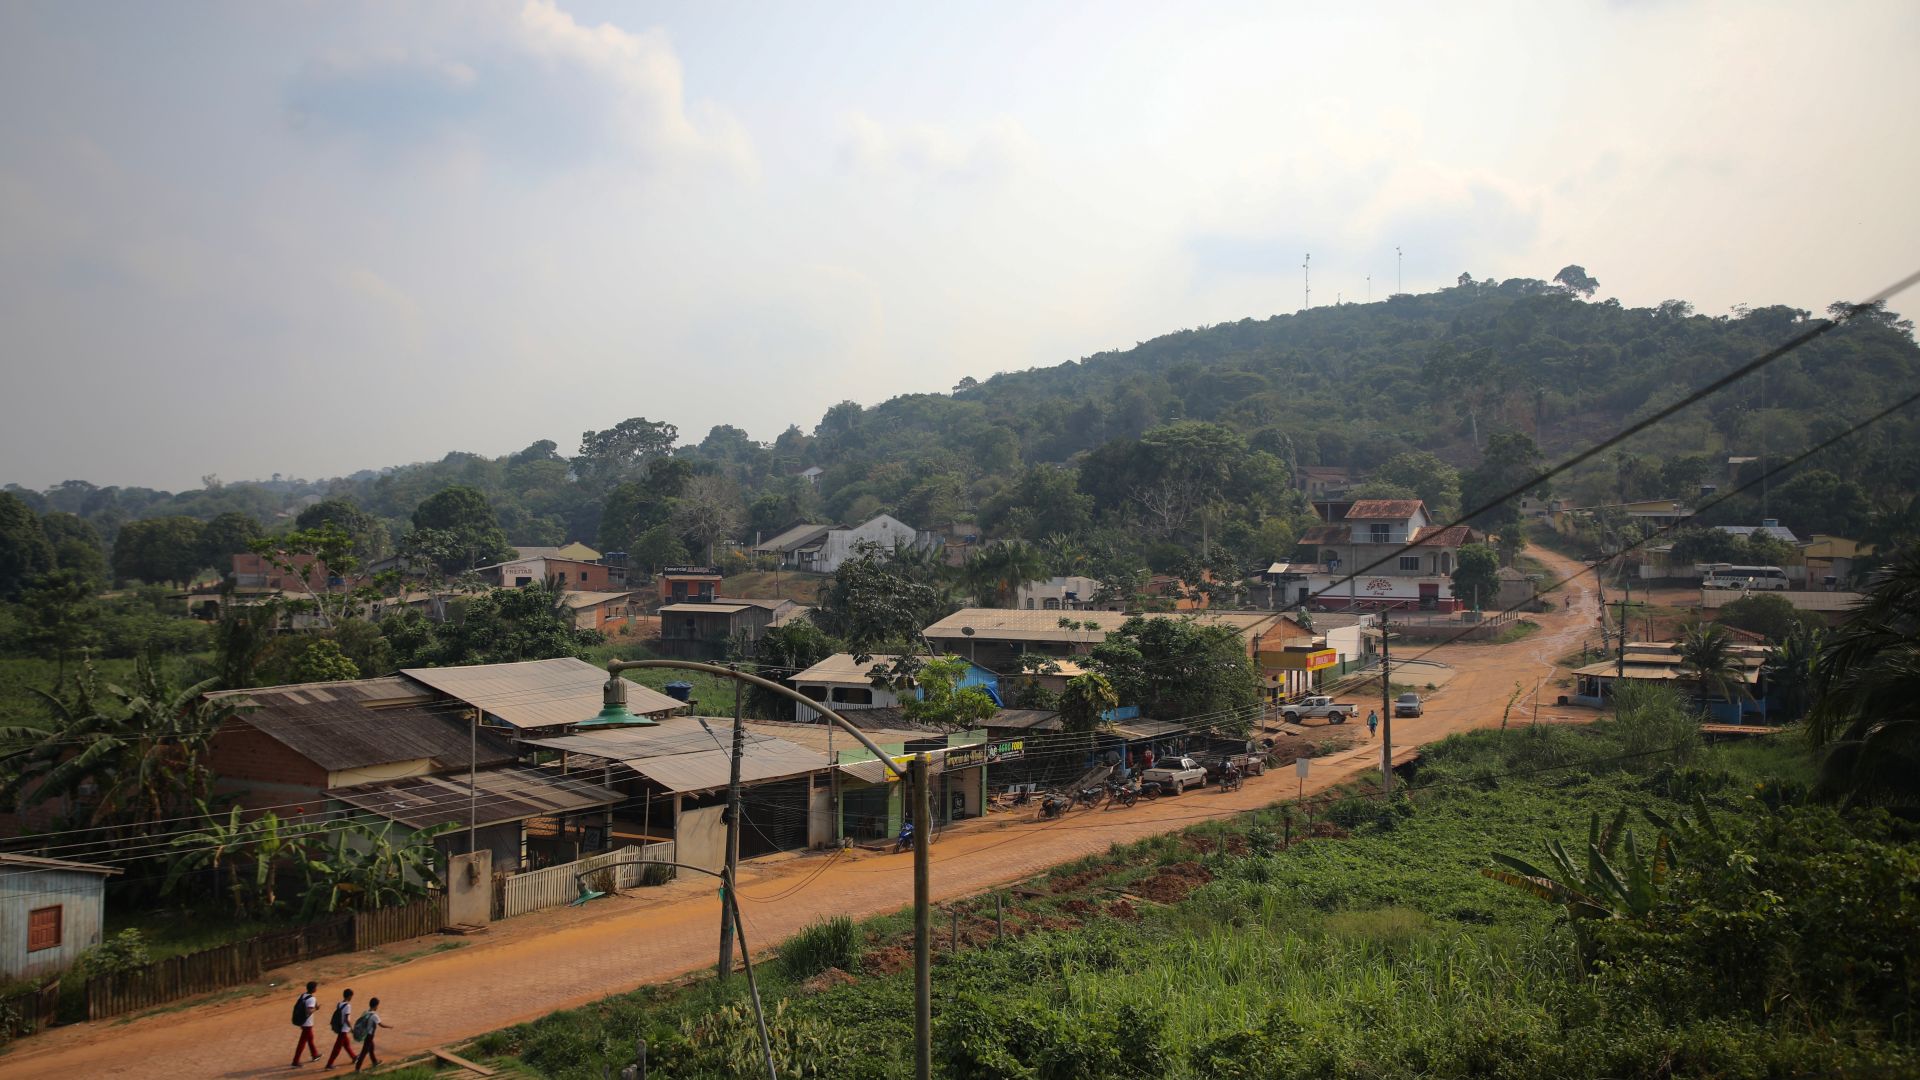 A dirt road, lined with modest homes, runs through the Amazon rainforest.